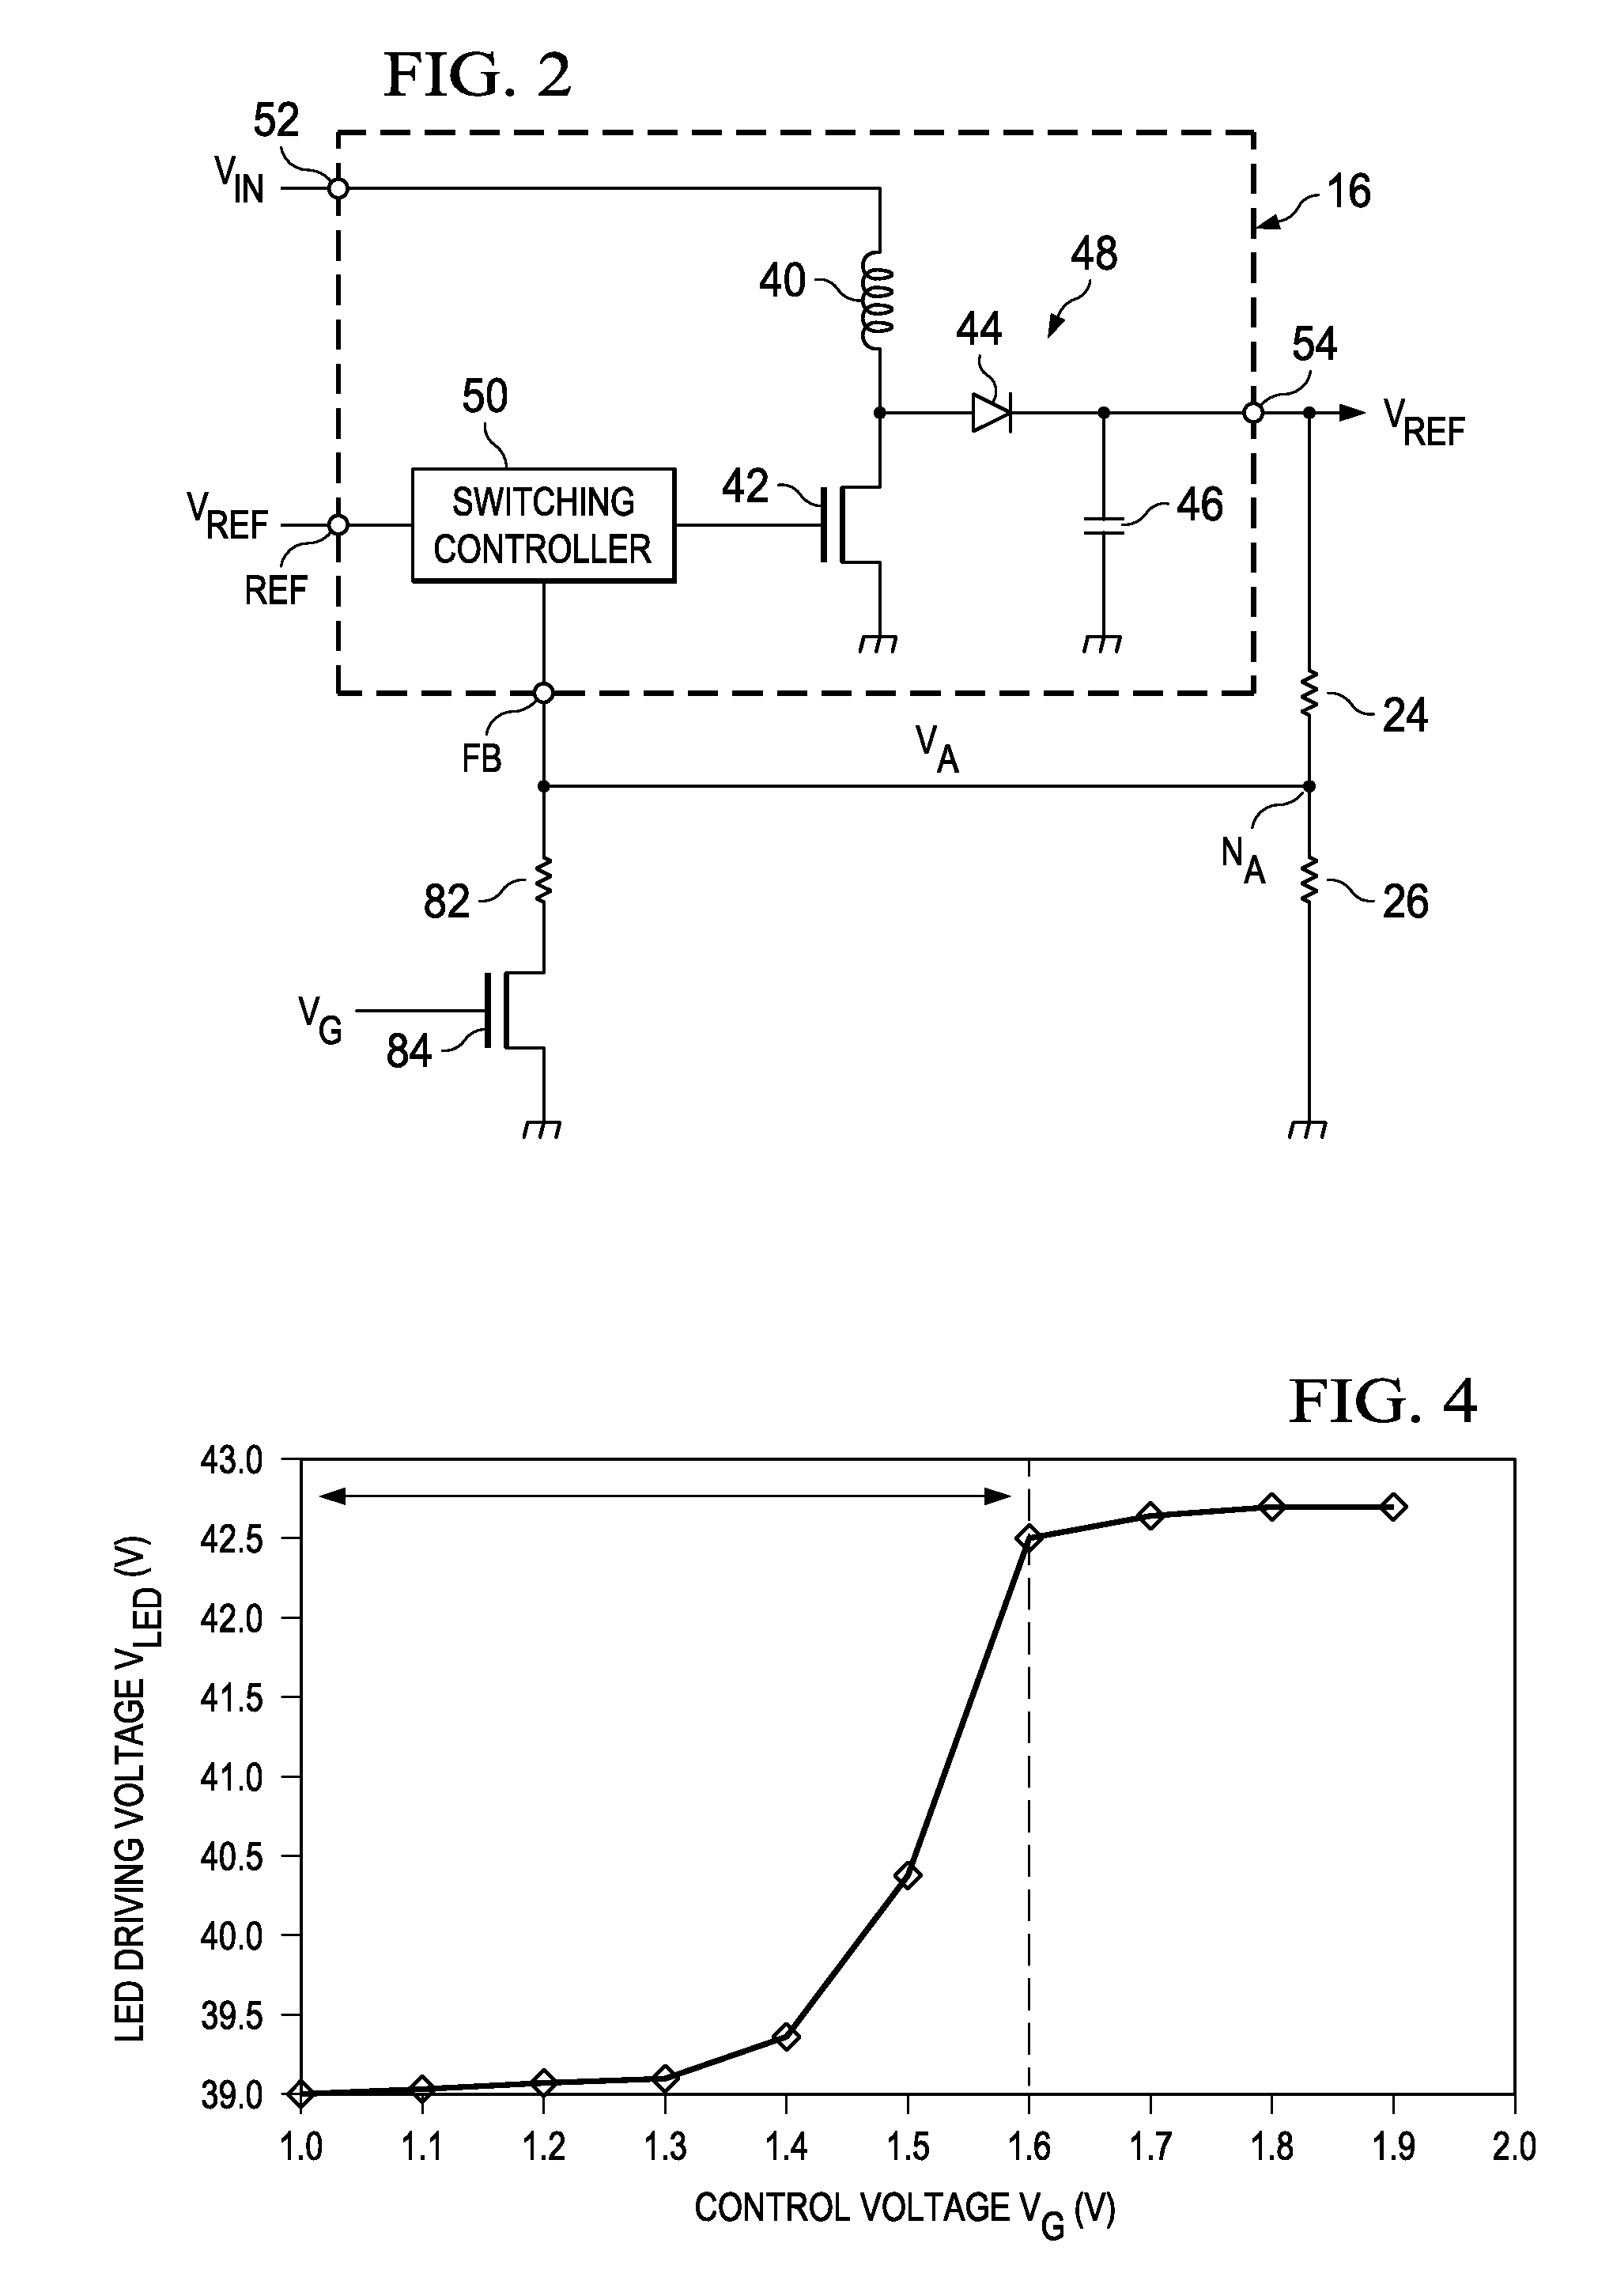 LED device and LED driver